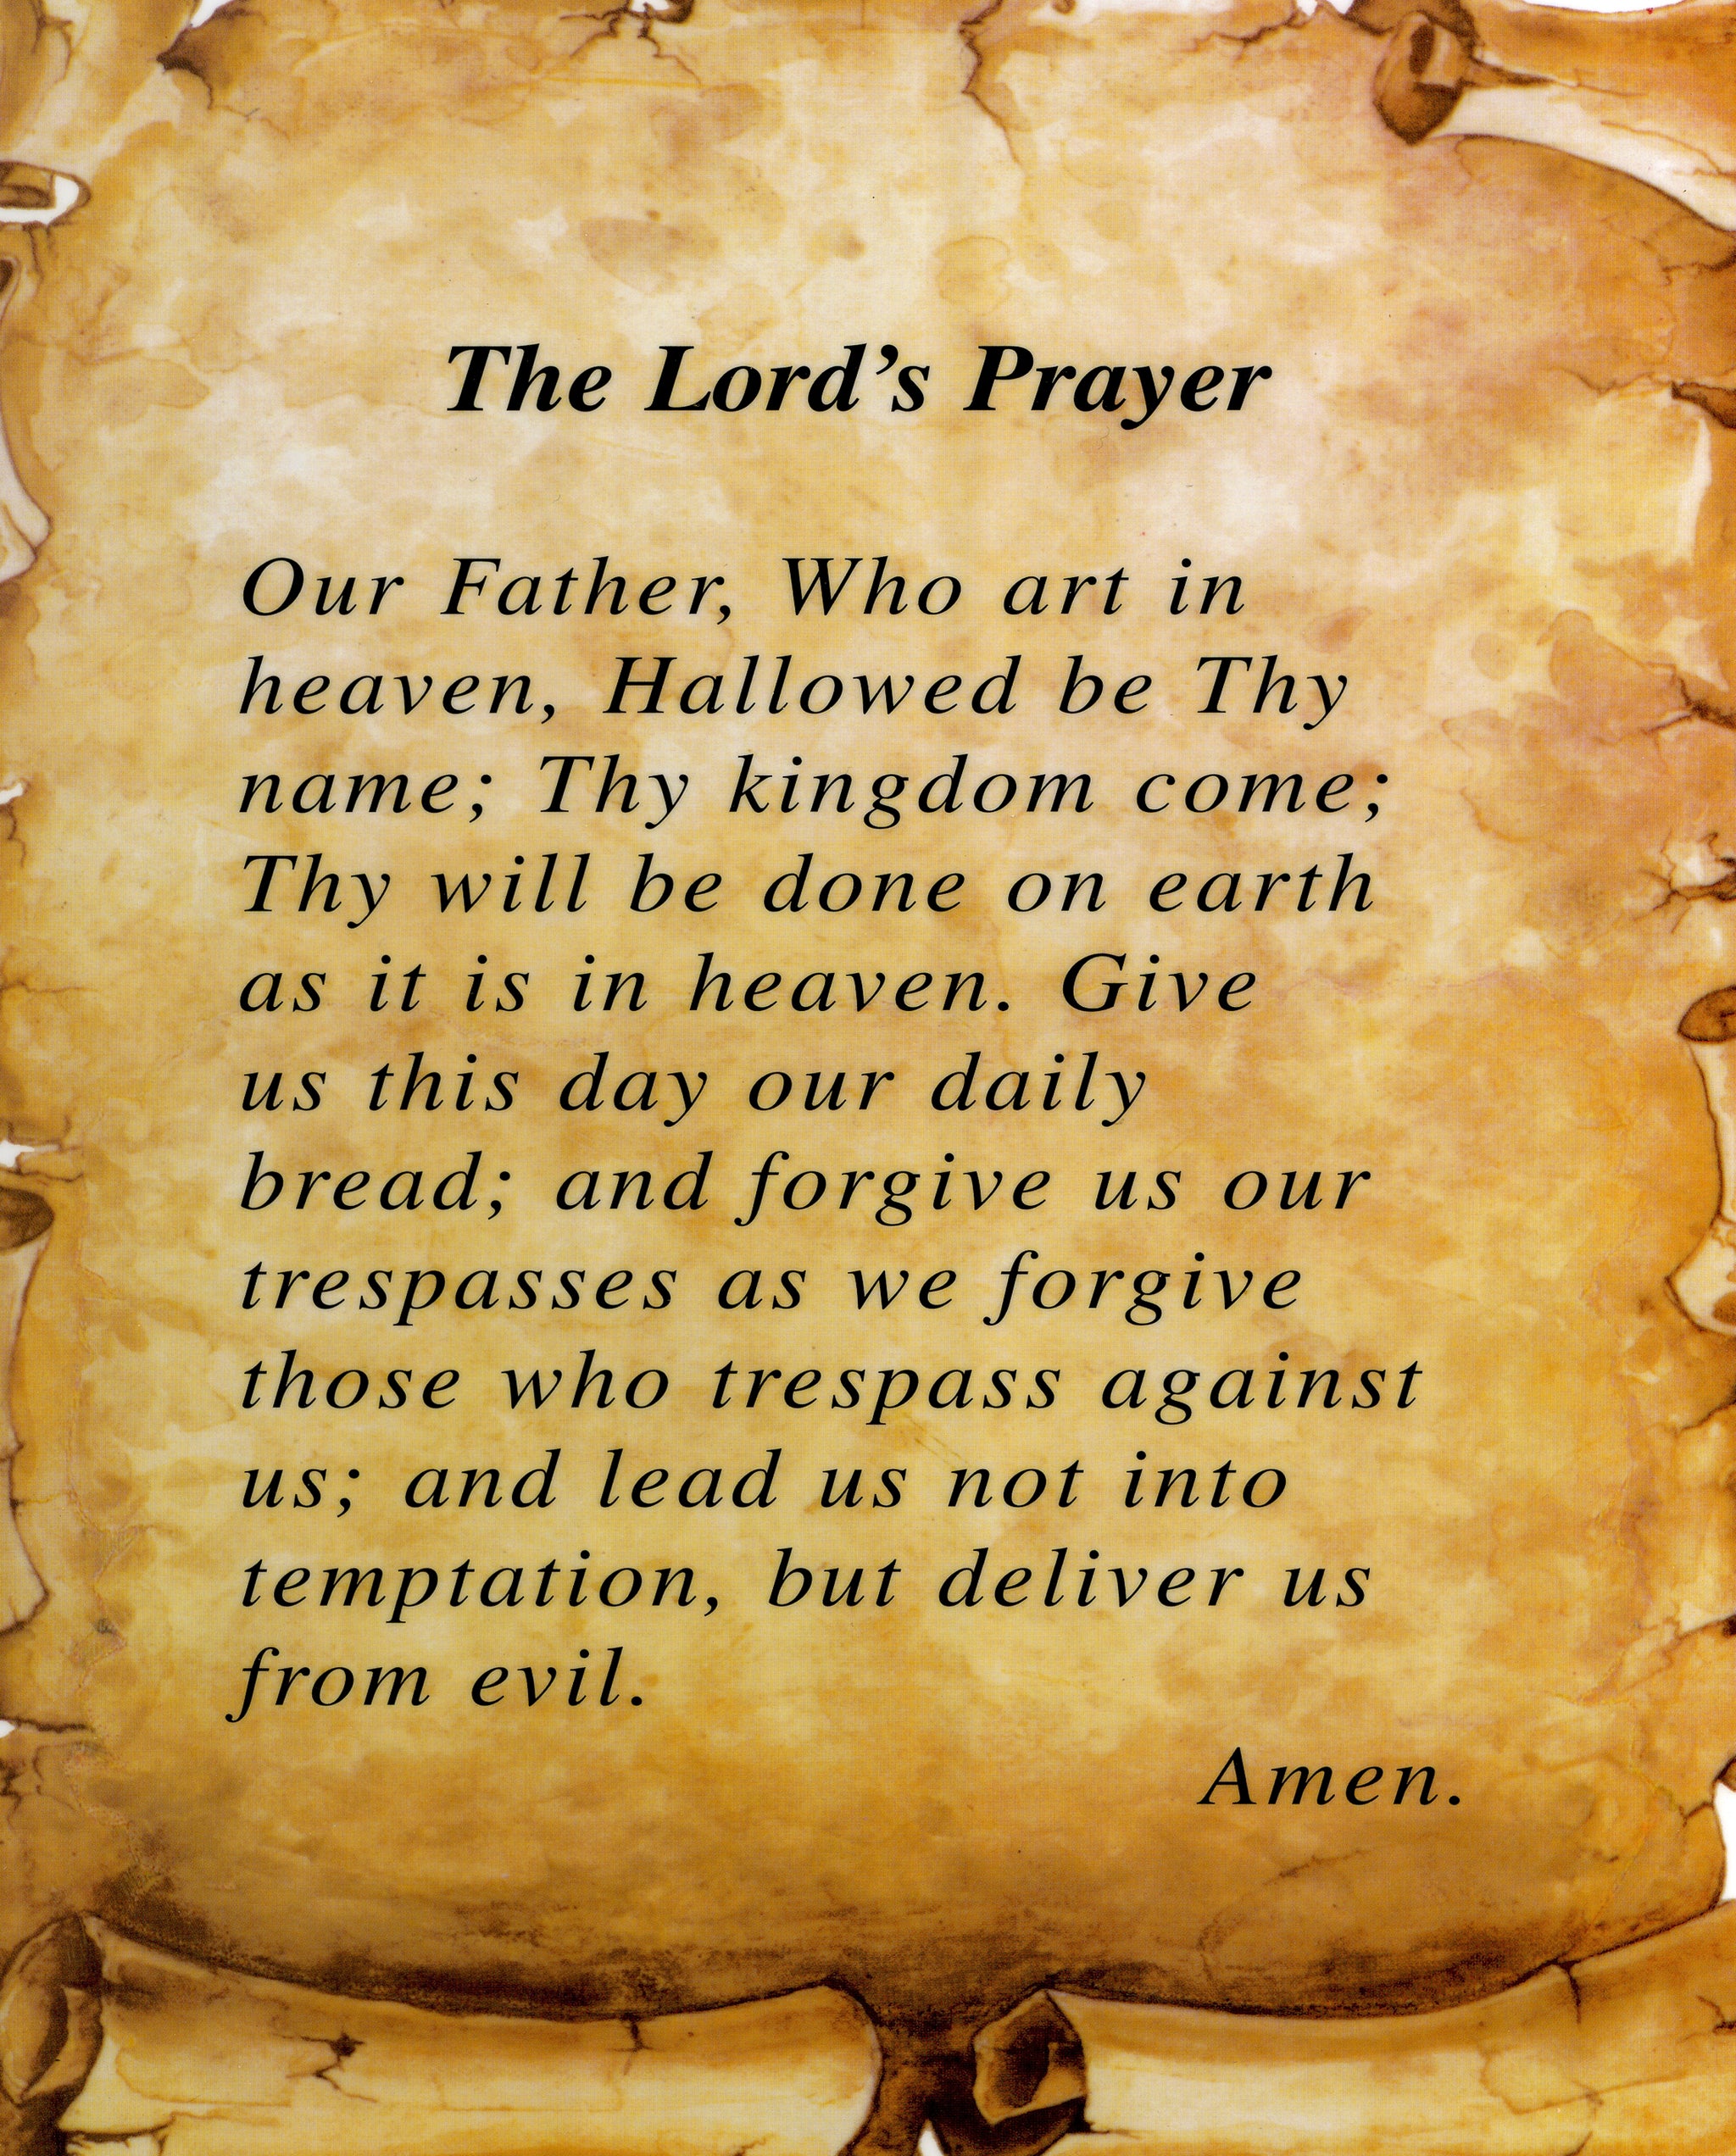 presentation of the lord's prayer